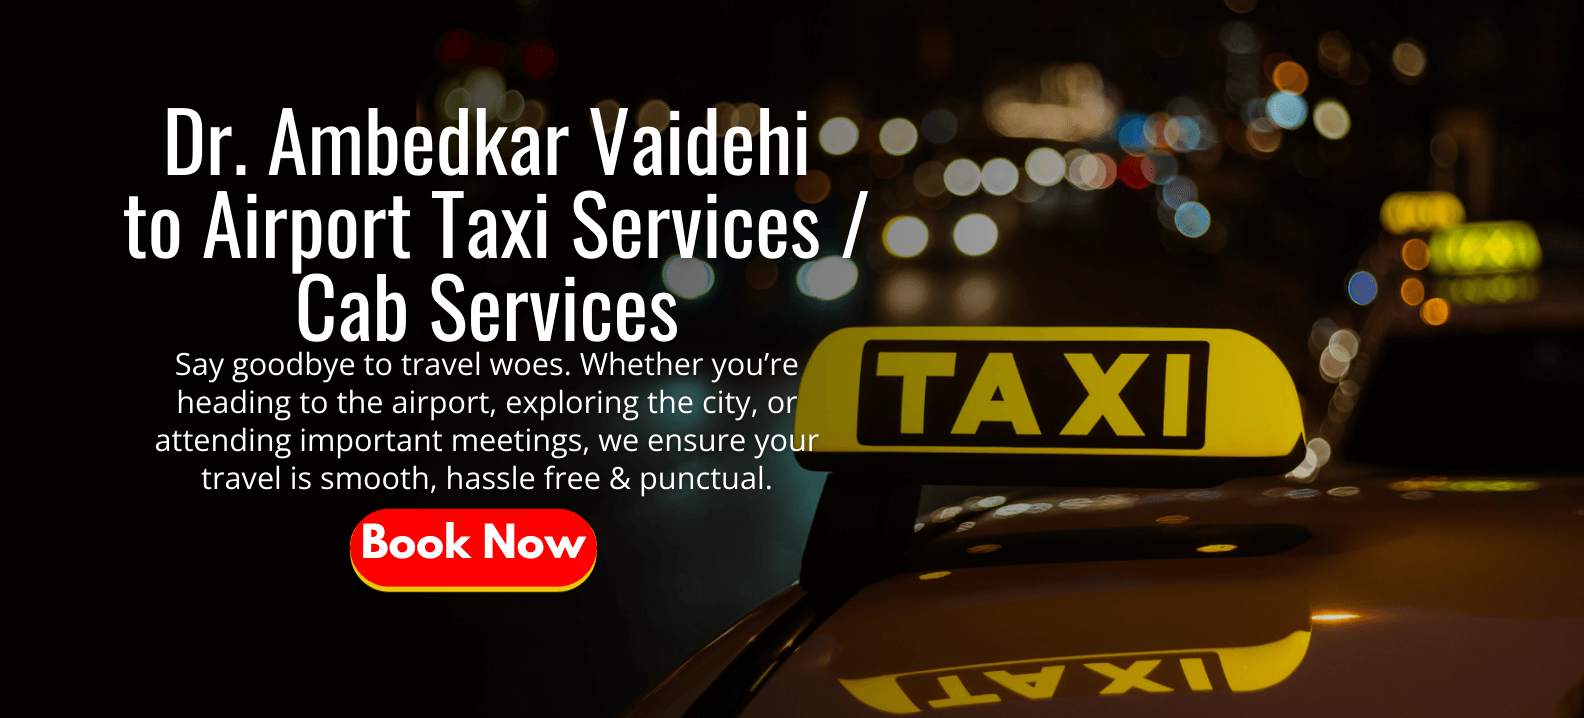 Dr. Ambedkar Vaidehi to Airport Taxi Services _ Cab Services